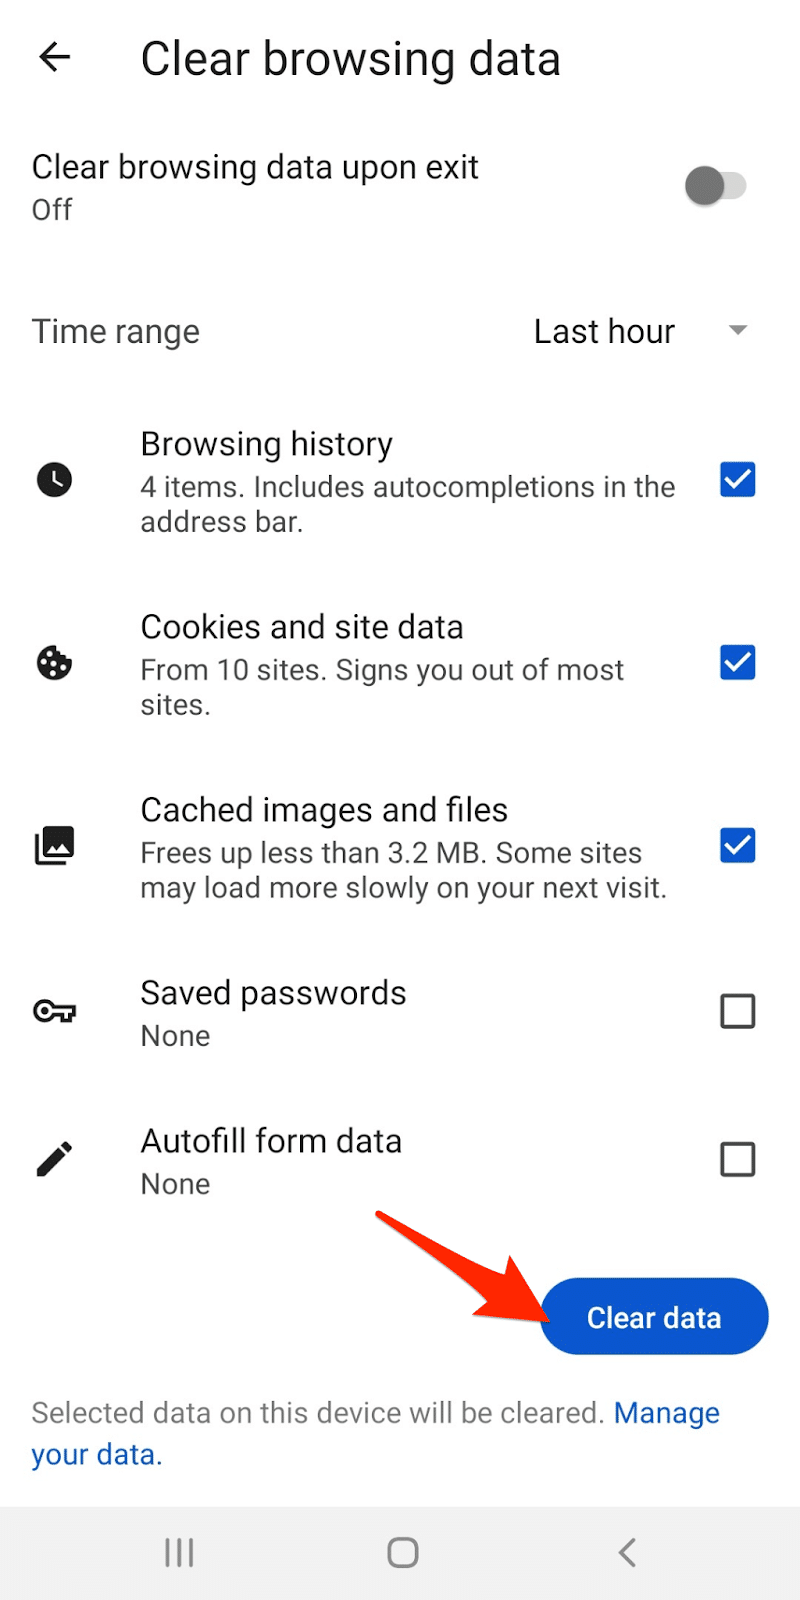 Tap the "Clear data" button